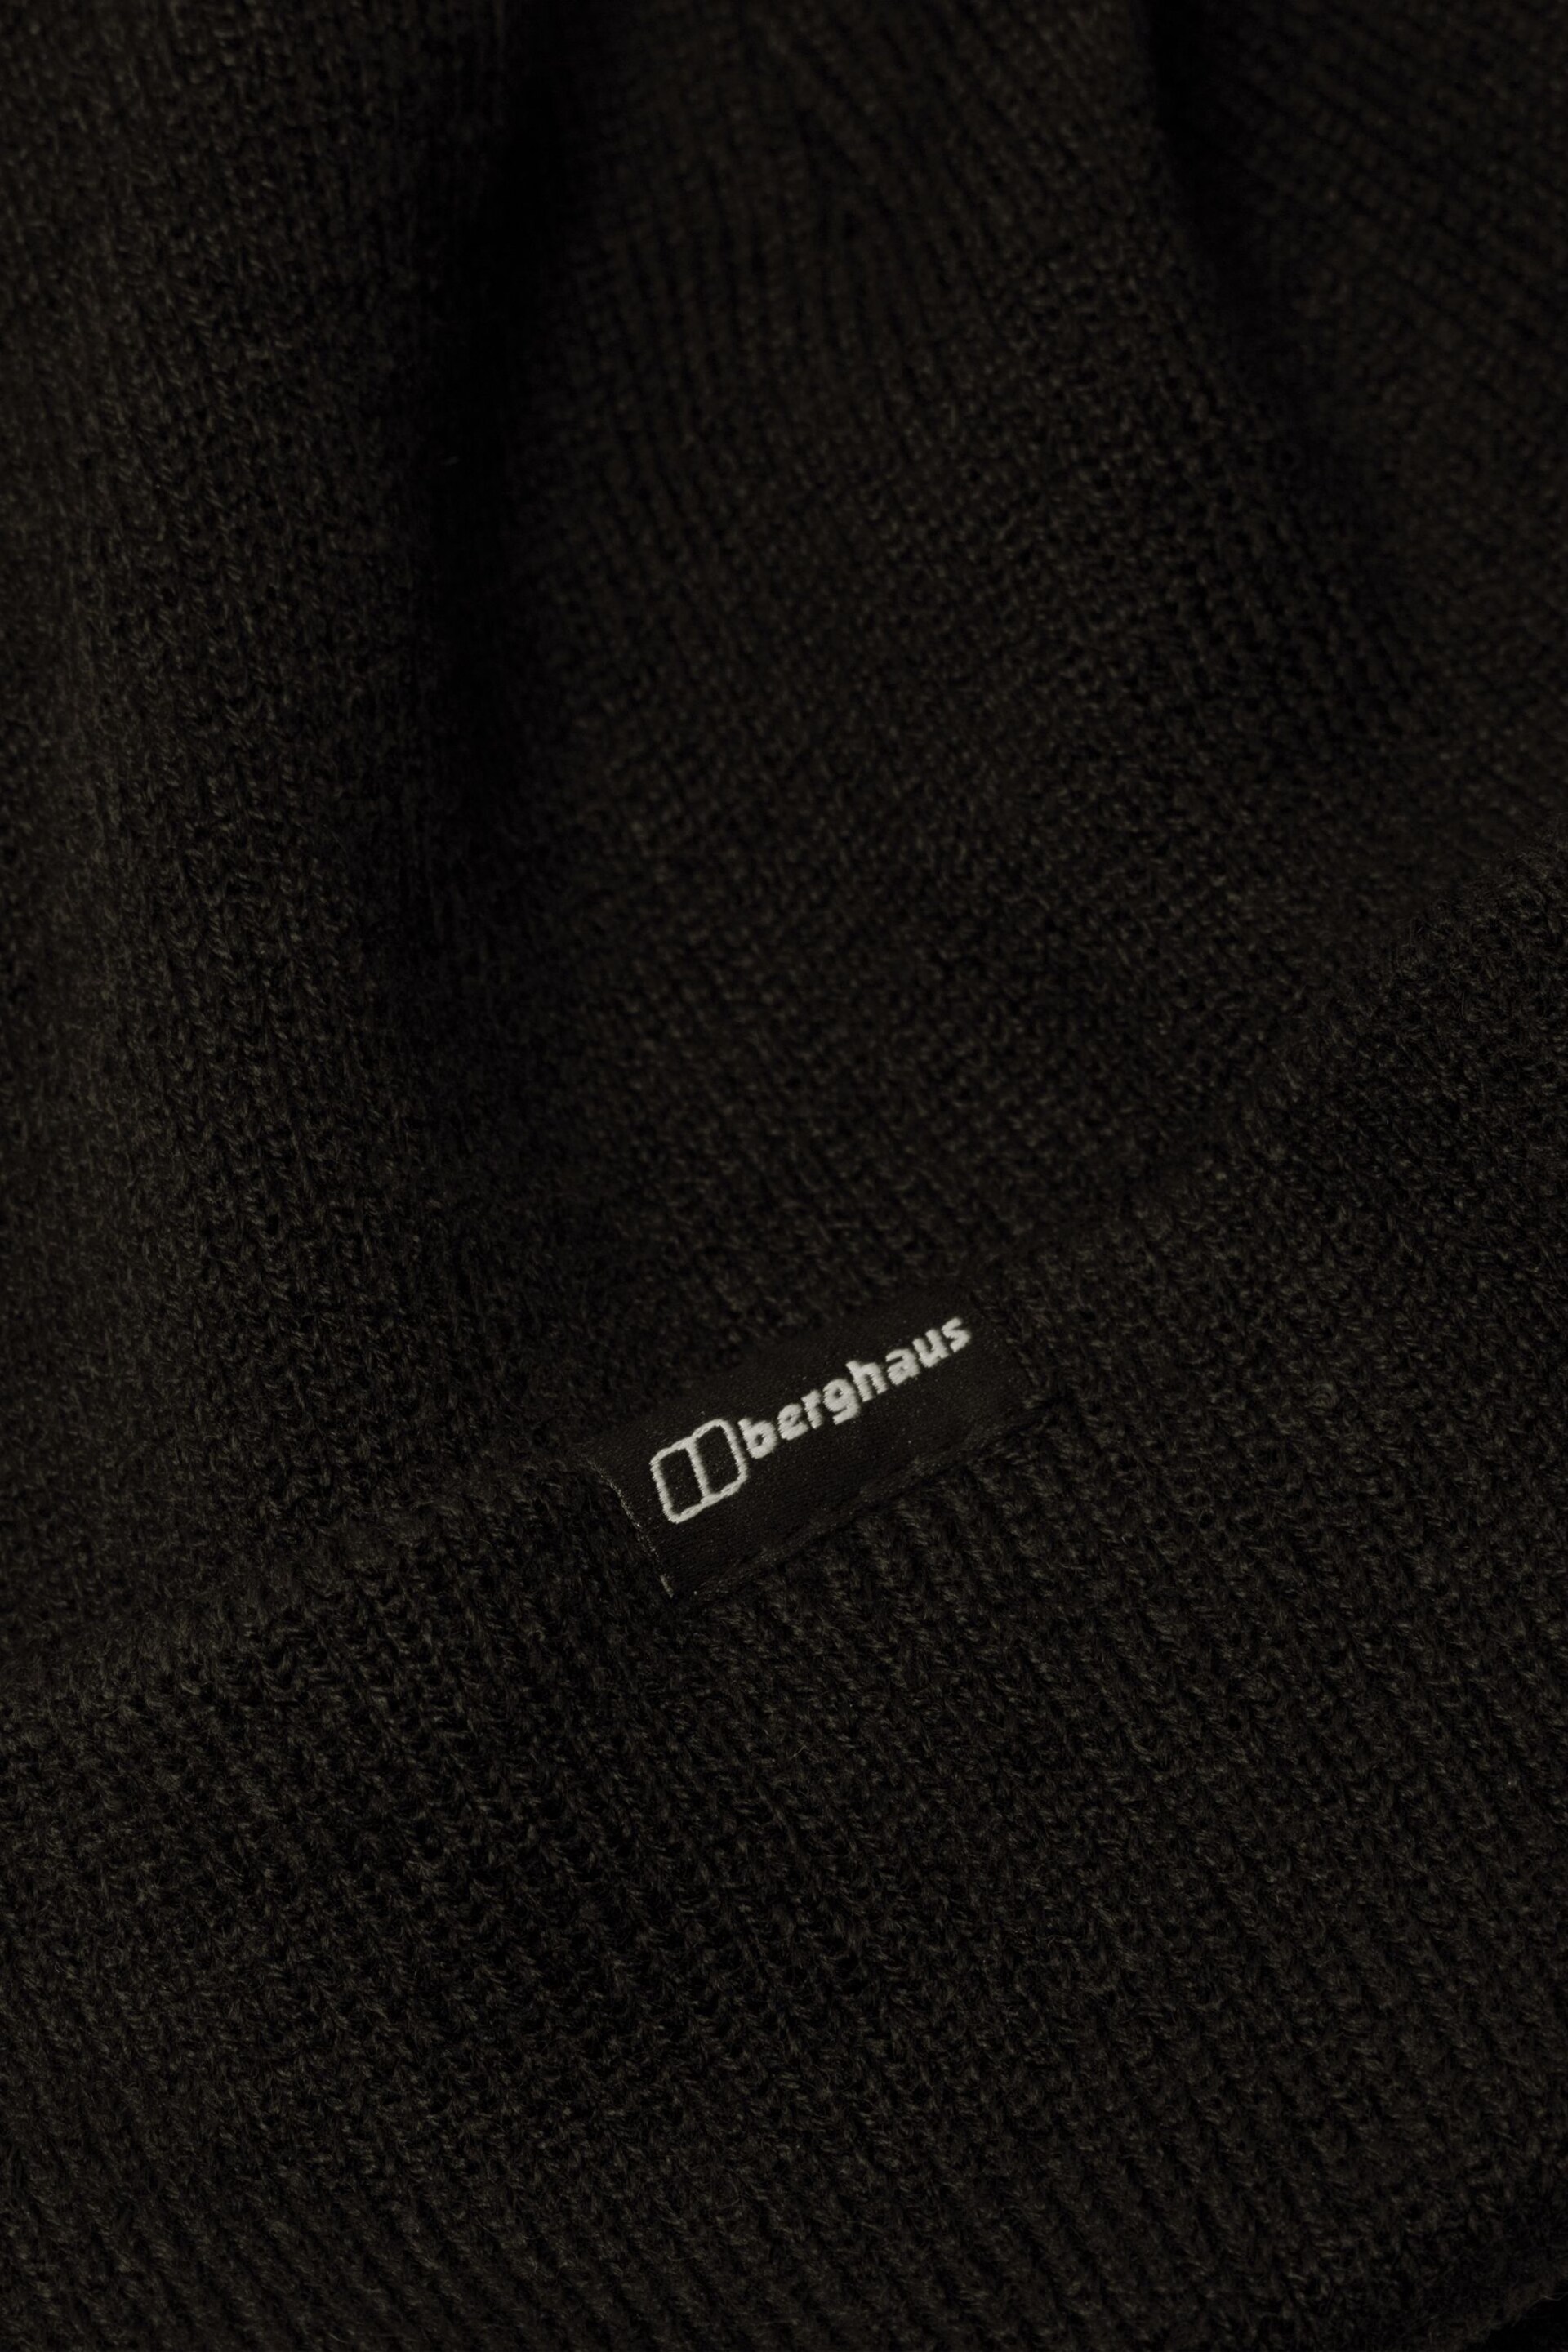 Berghaus Inflection Black Beanie - Image 4 of 8